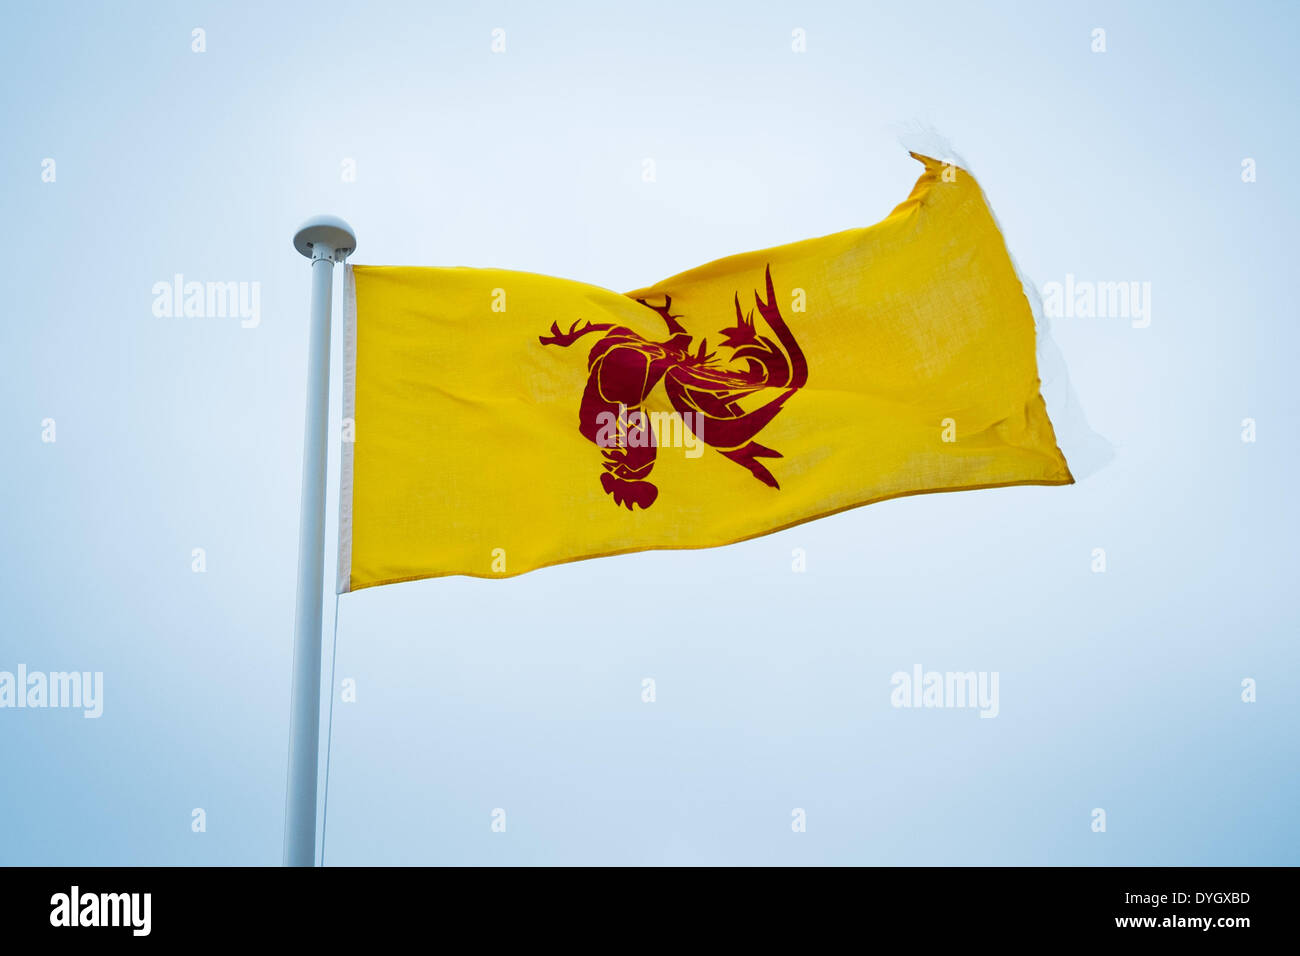 Aberystwyht Wales UK, april 17 2014  The Red Walloon Rooster flag of Wallonia, the French community of Belgium, by mistake flying upside down on Aberystwyth promenade Credit:  keith morris/Alamy Live News Stock Photo